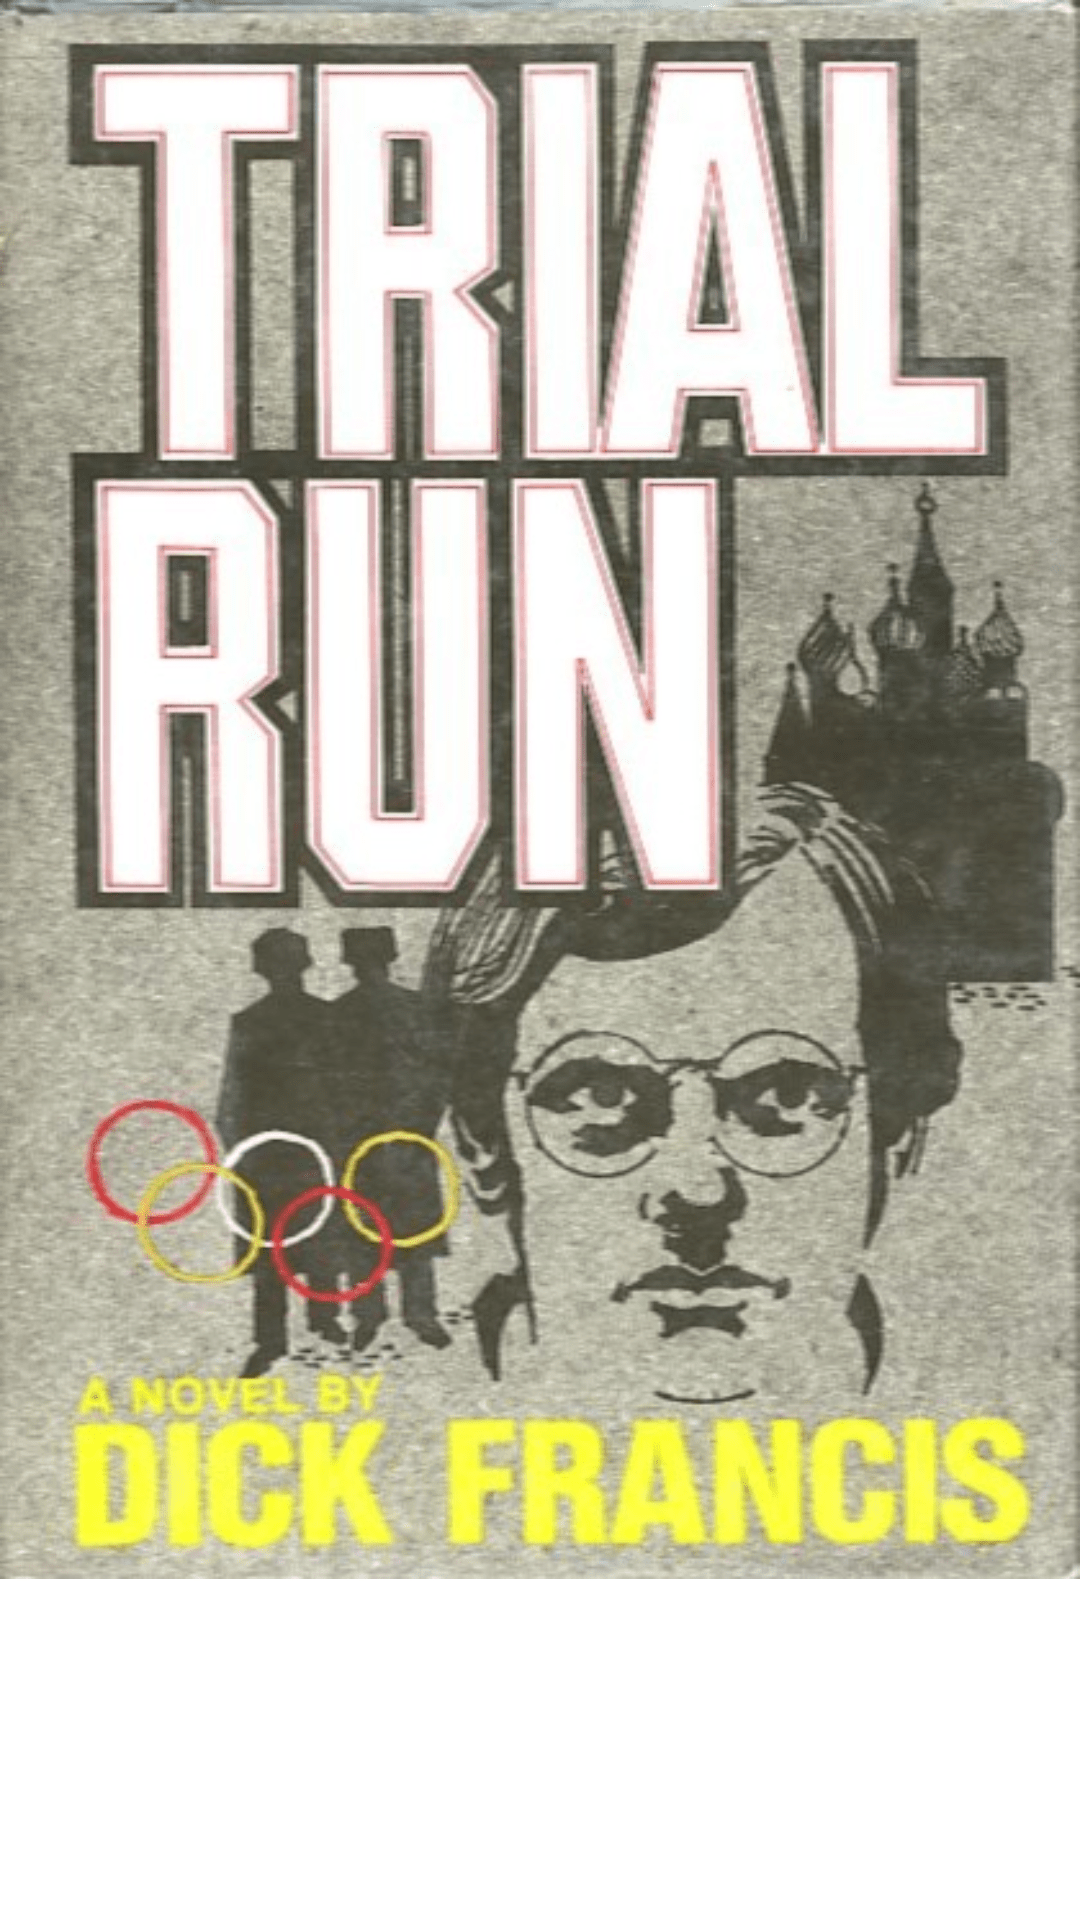 Trial Run by Dick Francis